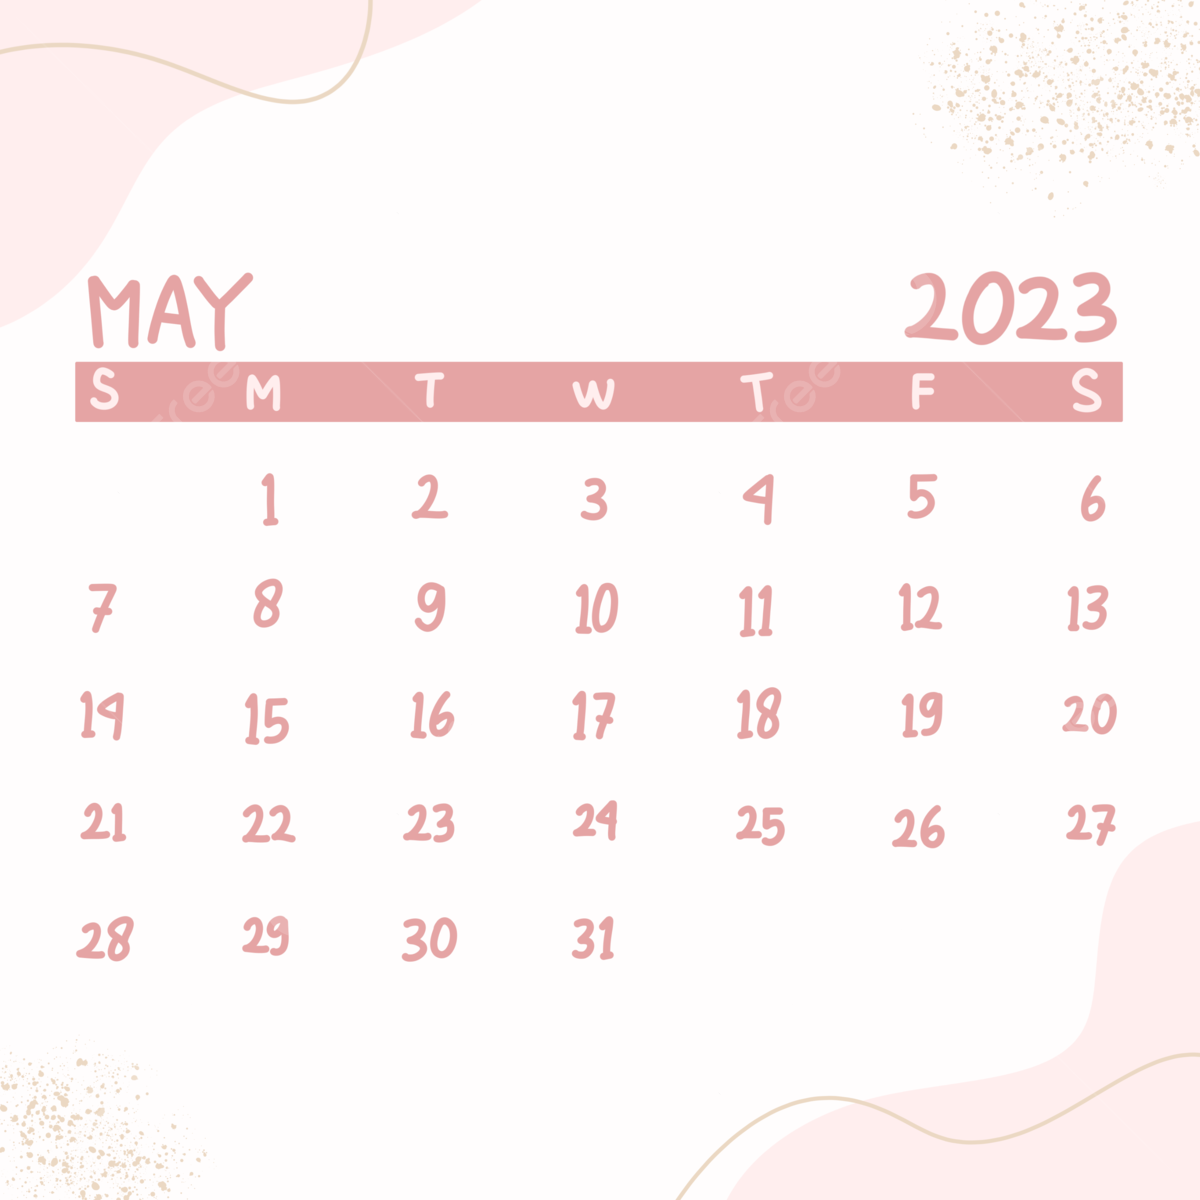  2023 Jahreskalender Hintergrundbild 1200x1200. Calendar May With Aesthetic Background, Calendar, Aesthetic Background Image And Wallpaper for Free Download